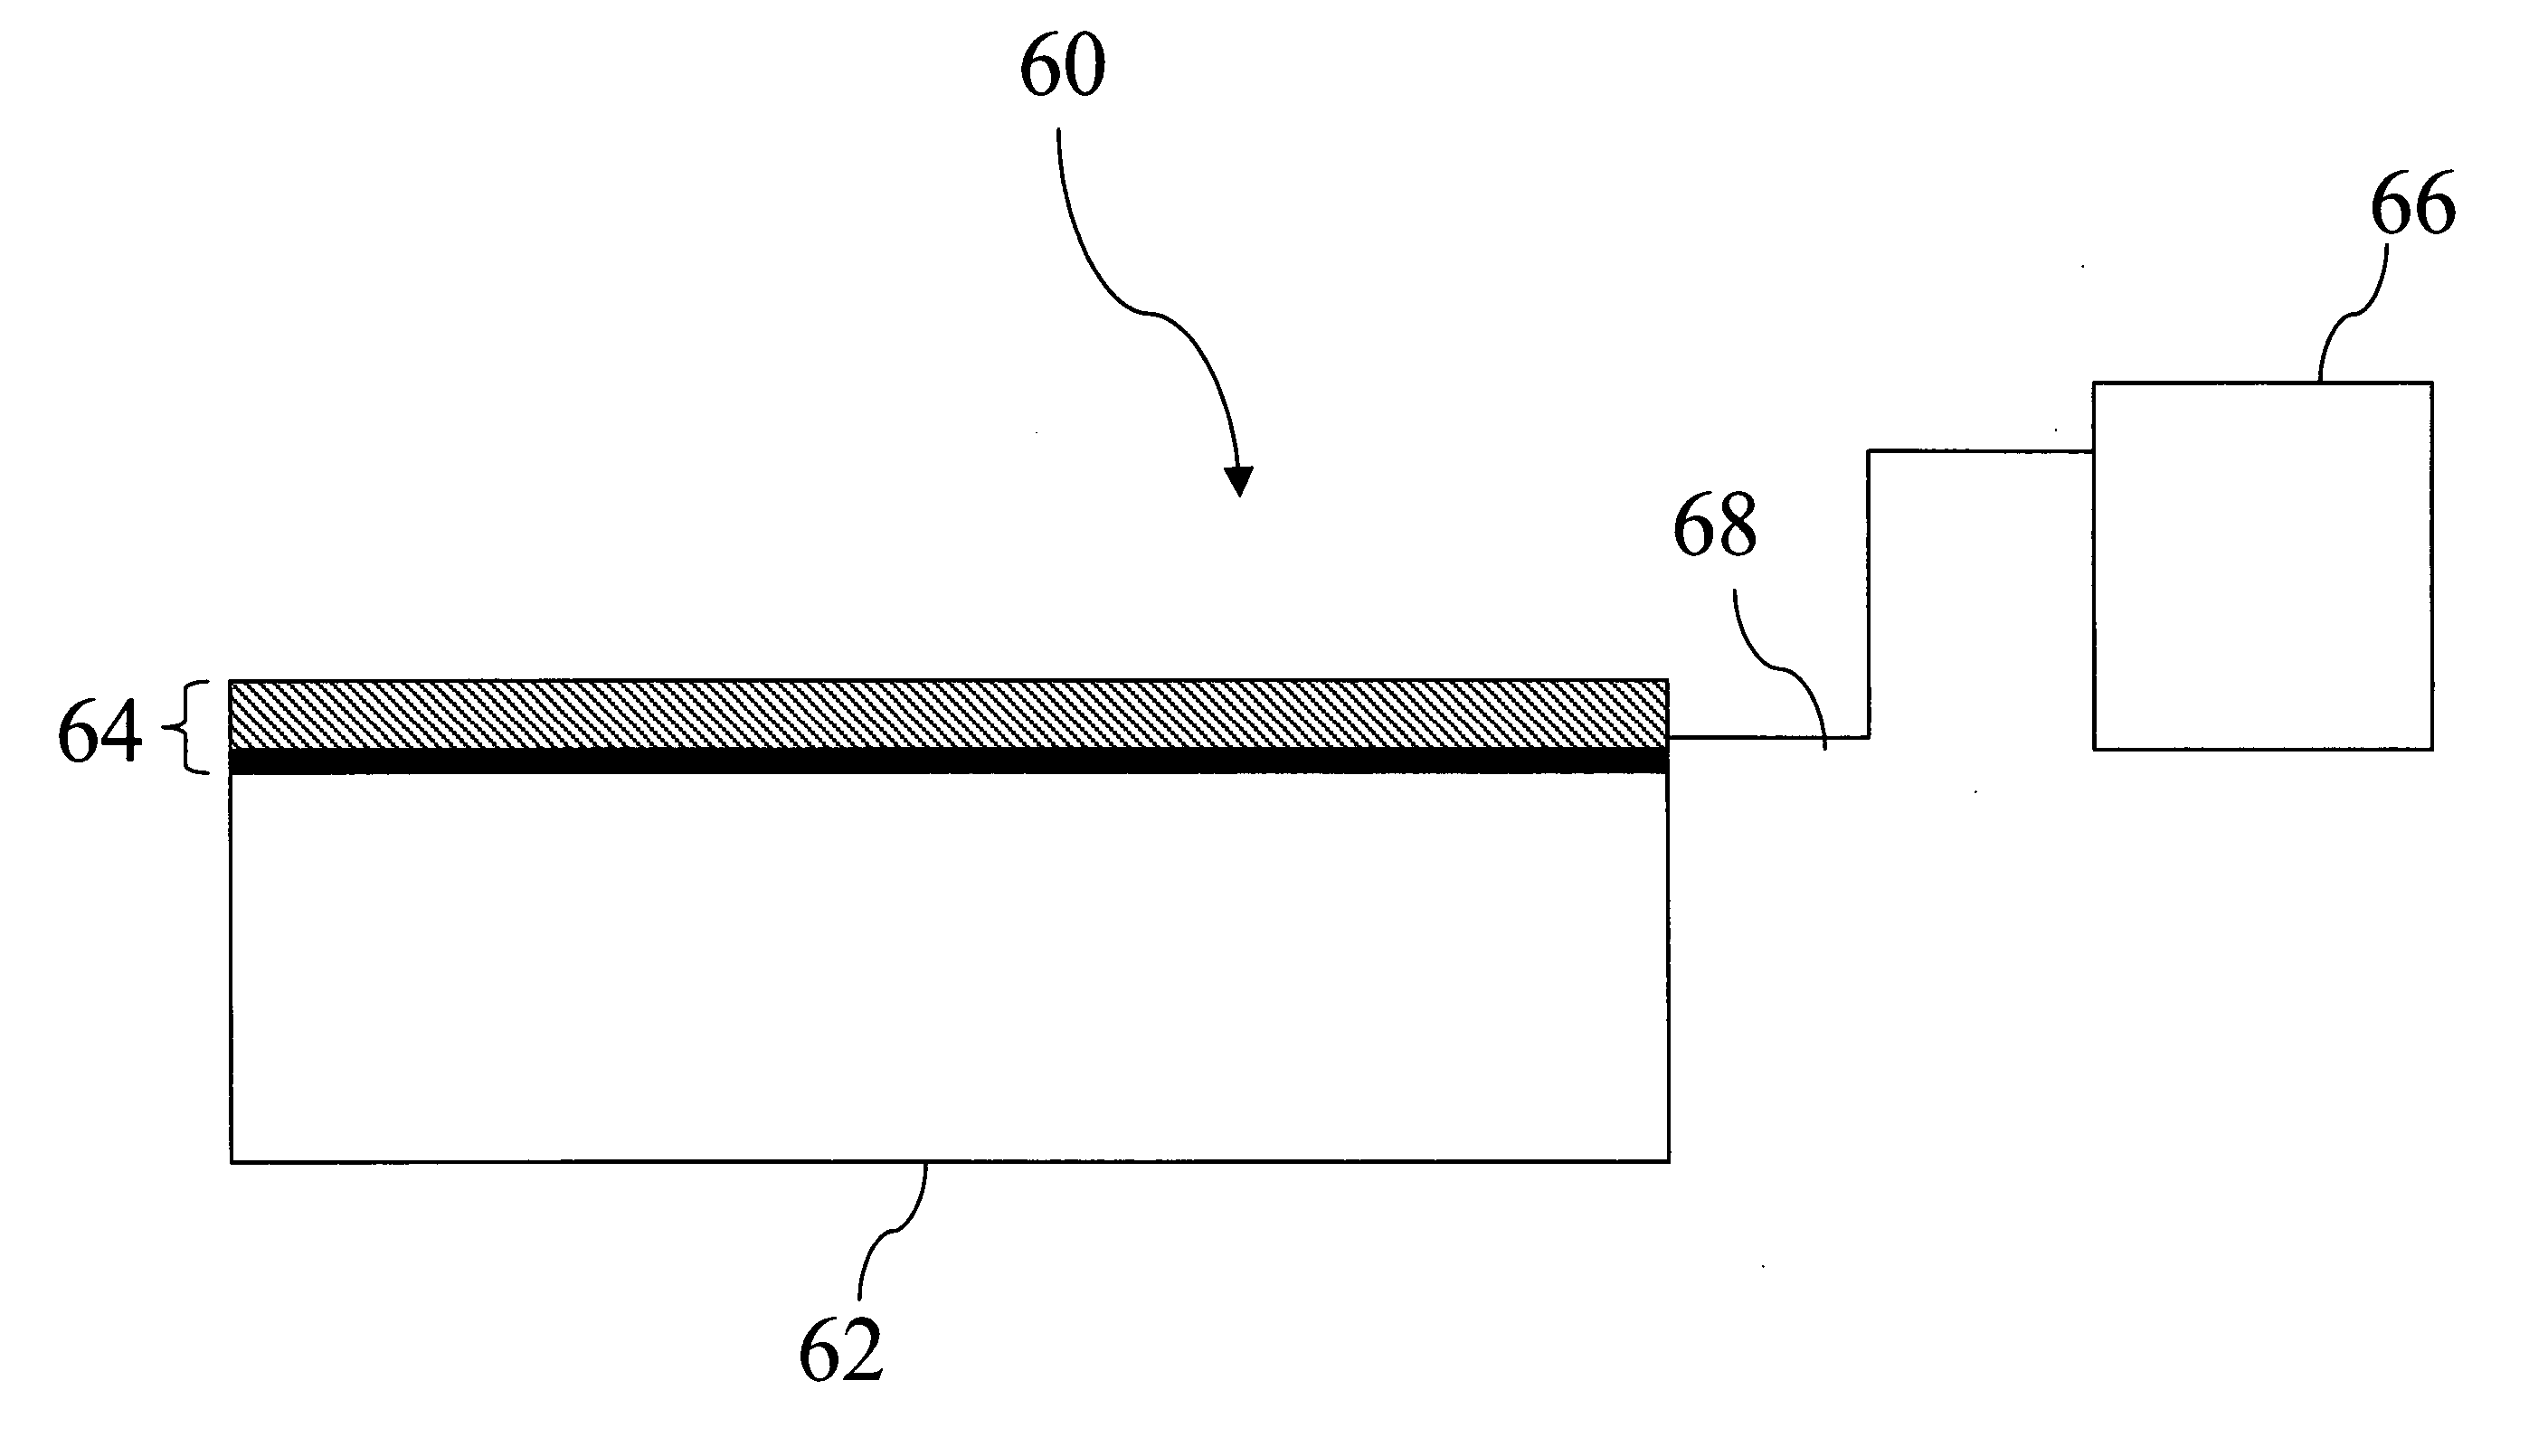 Metal and electronically conductive polymer transfer